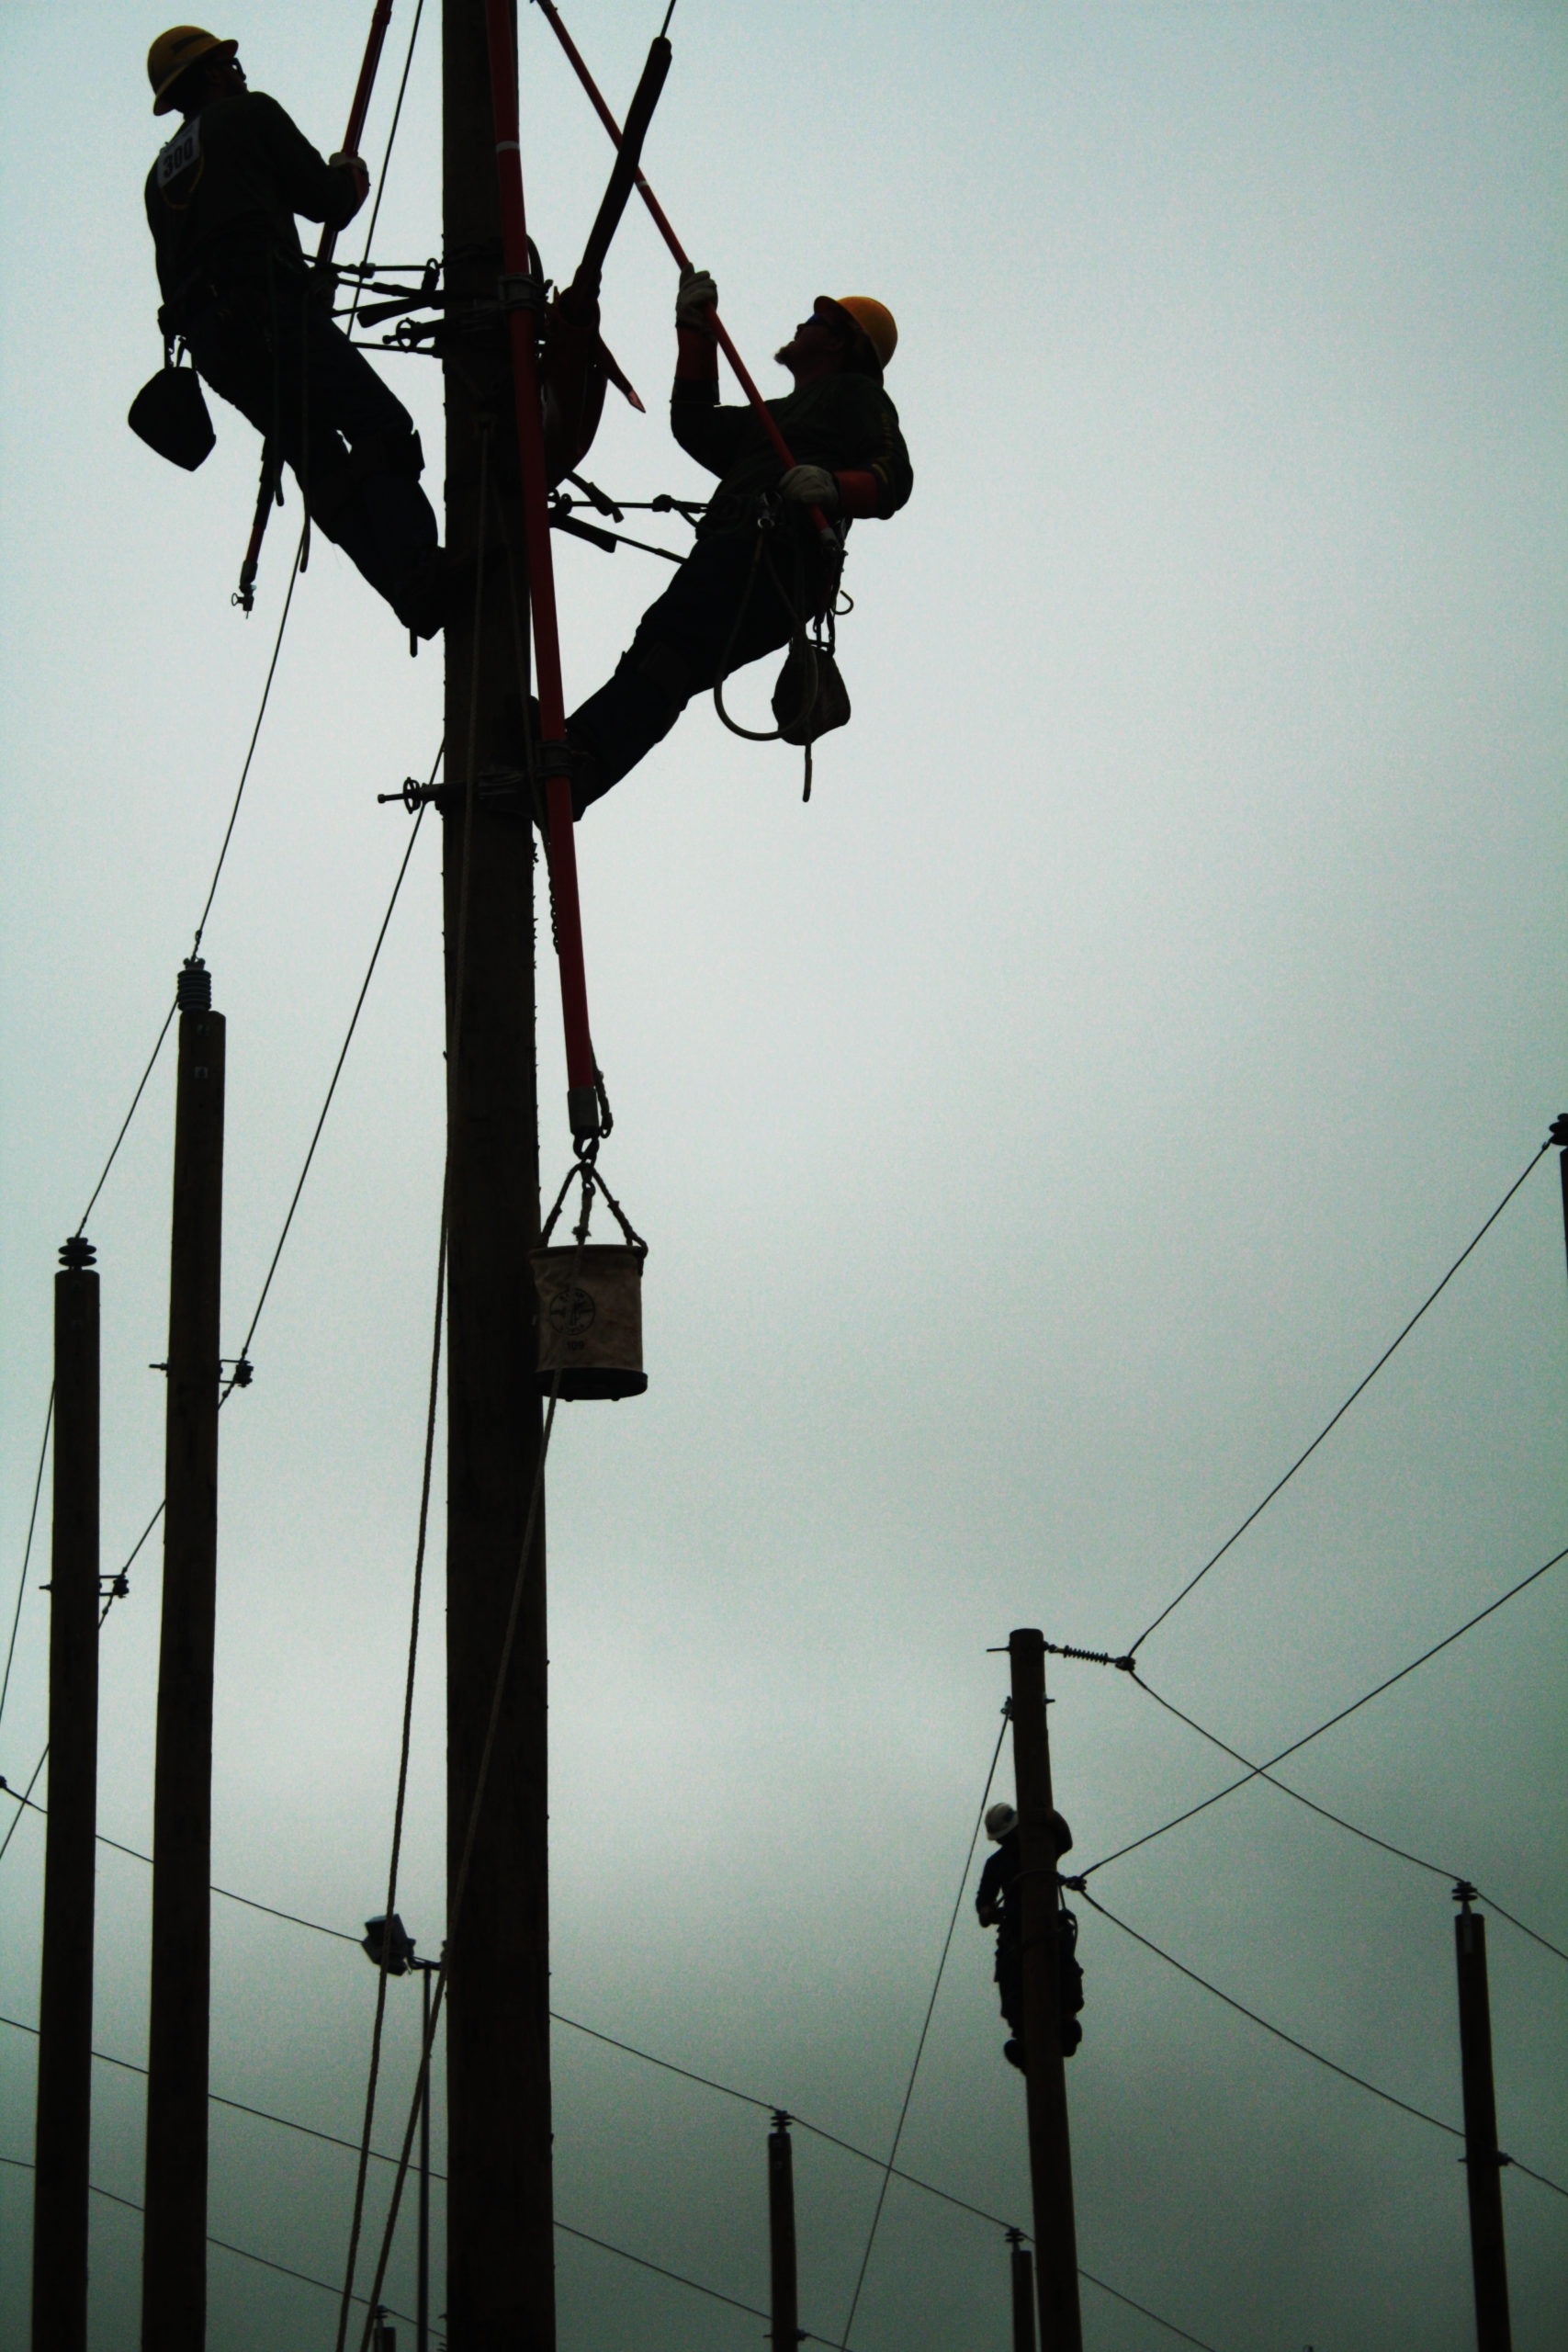 Silhouette -  Lineworkers doing what they do